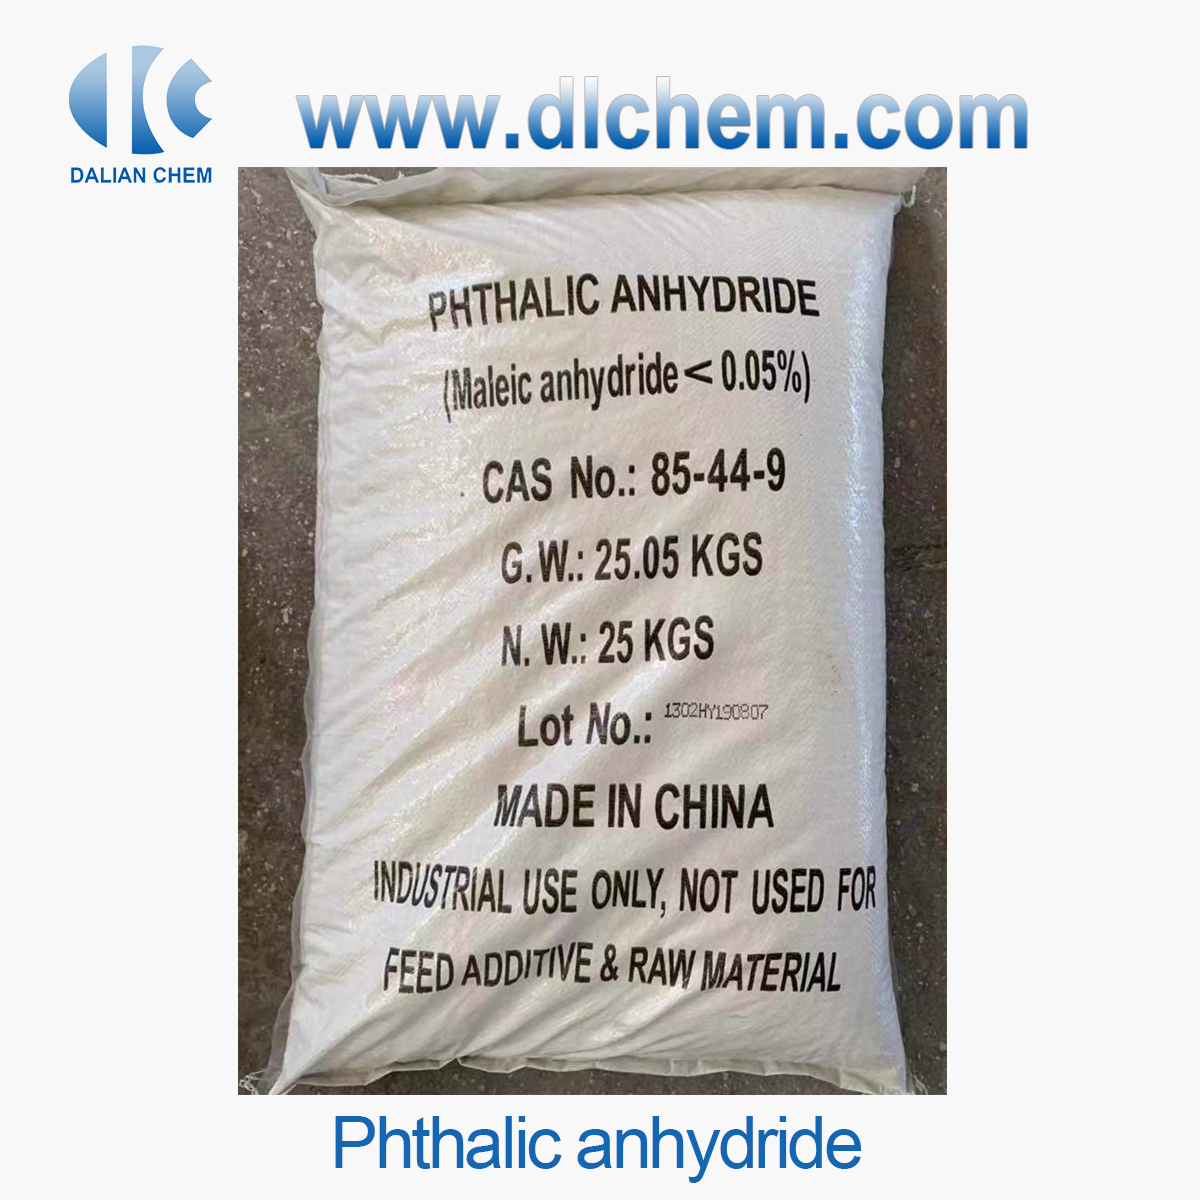 Phthalic anhydride CAS No.85-44-9